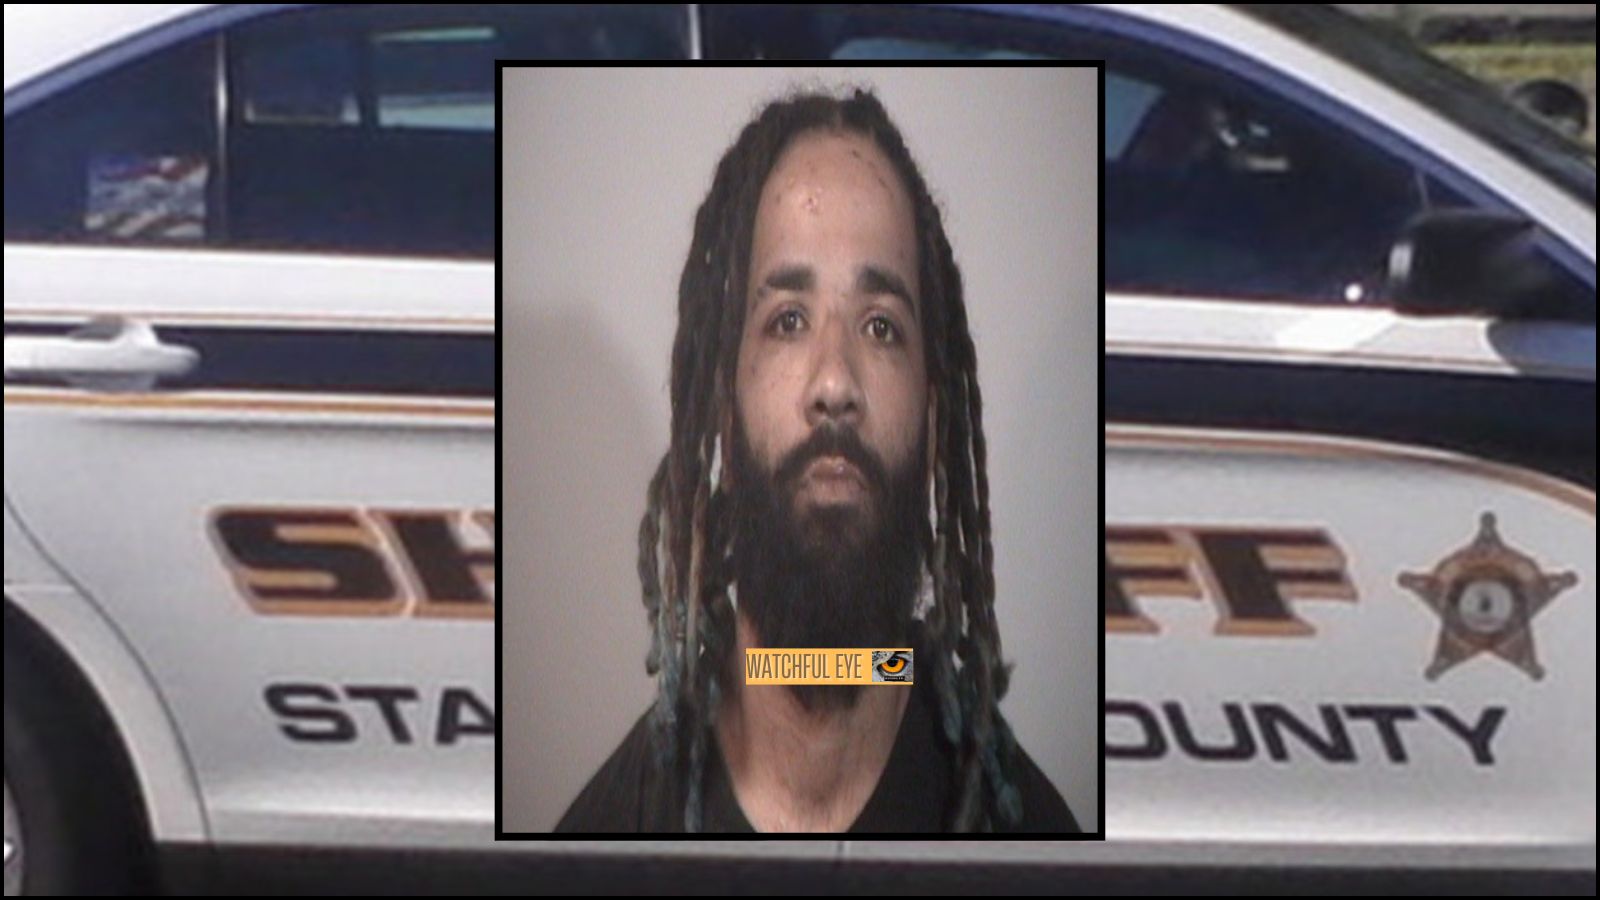 Car trouble in Stafford leads to arrest of wanted Maryland man